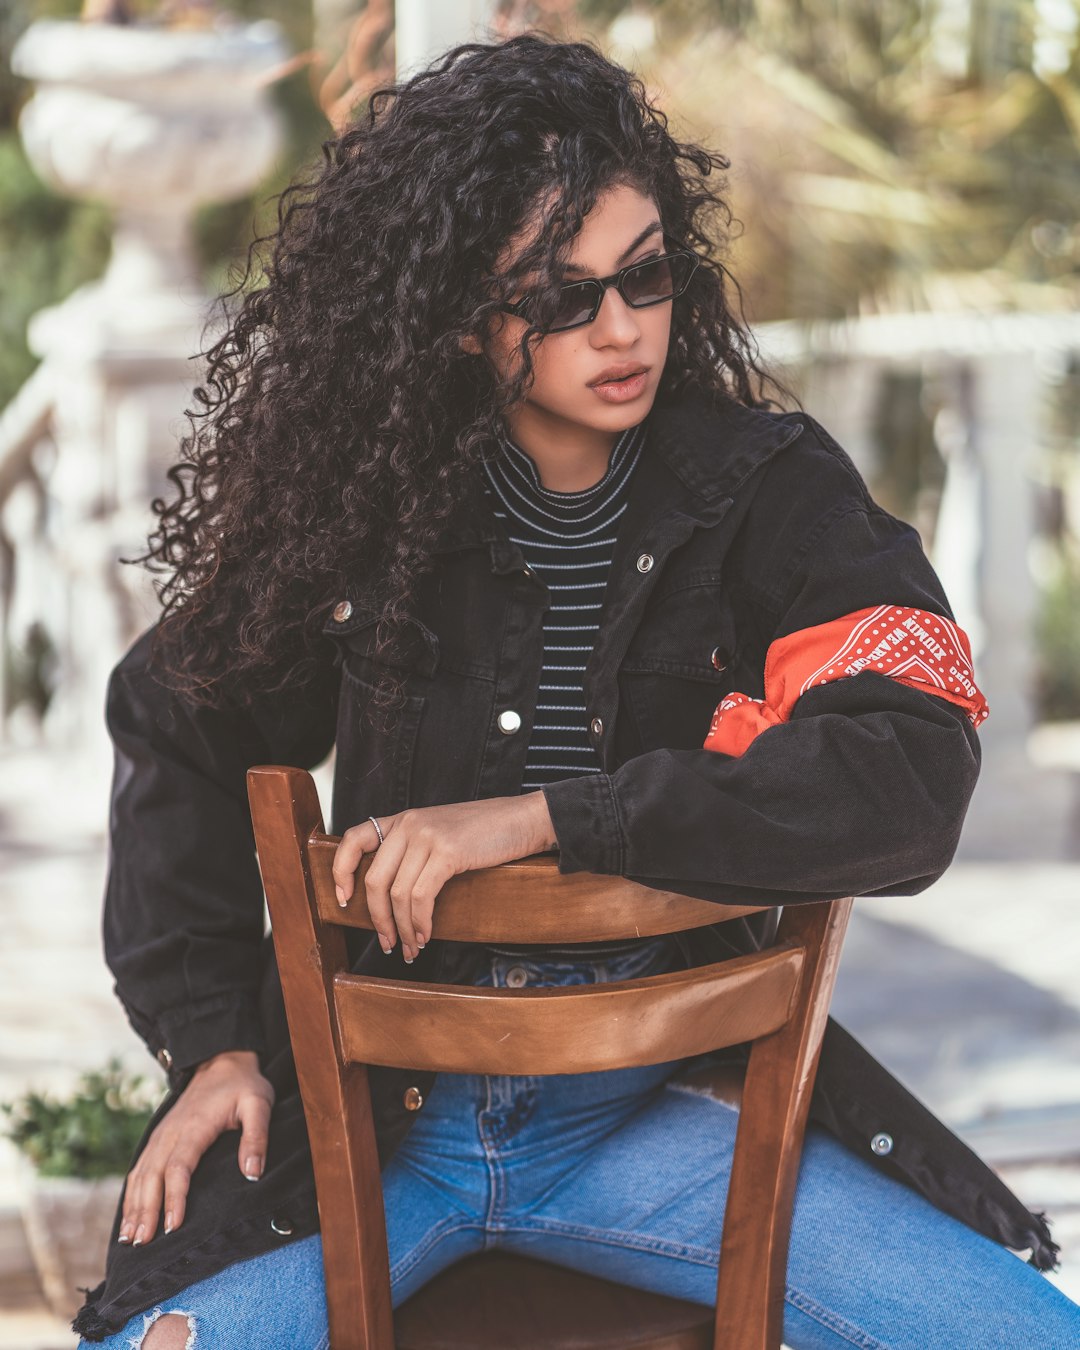 woman in black jacket sitting on brown wooden chair